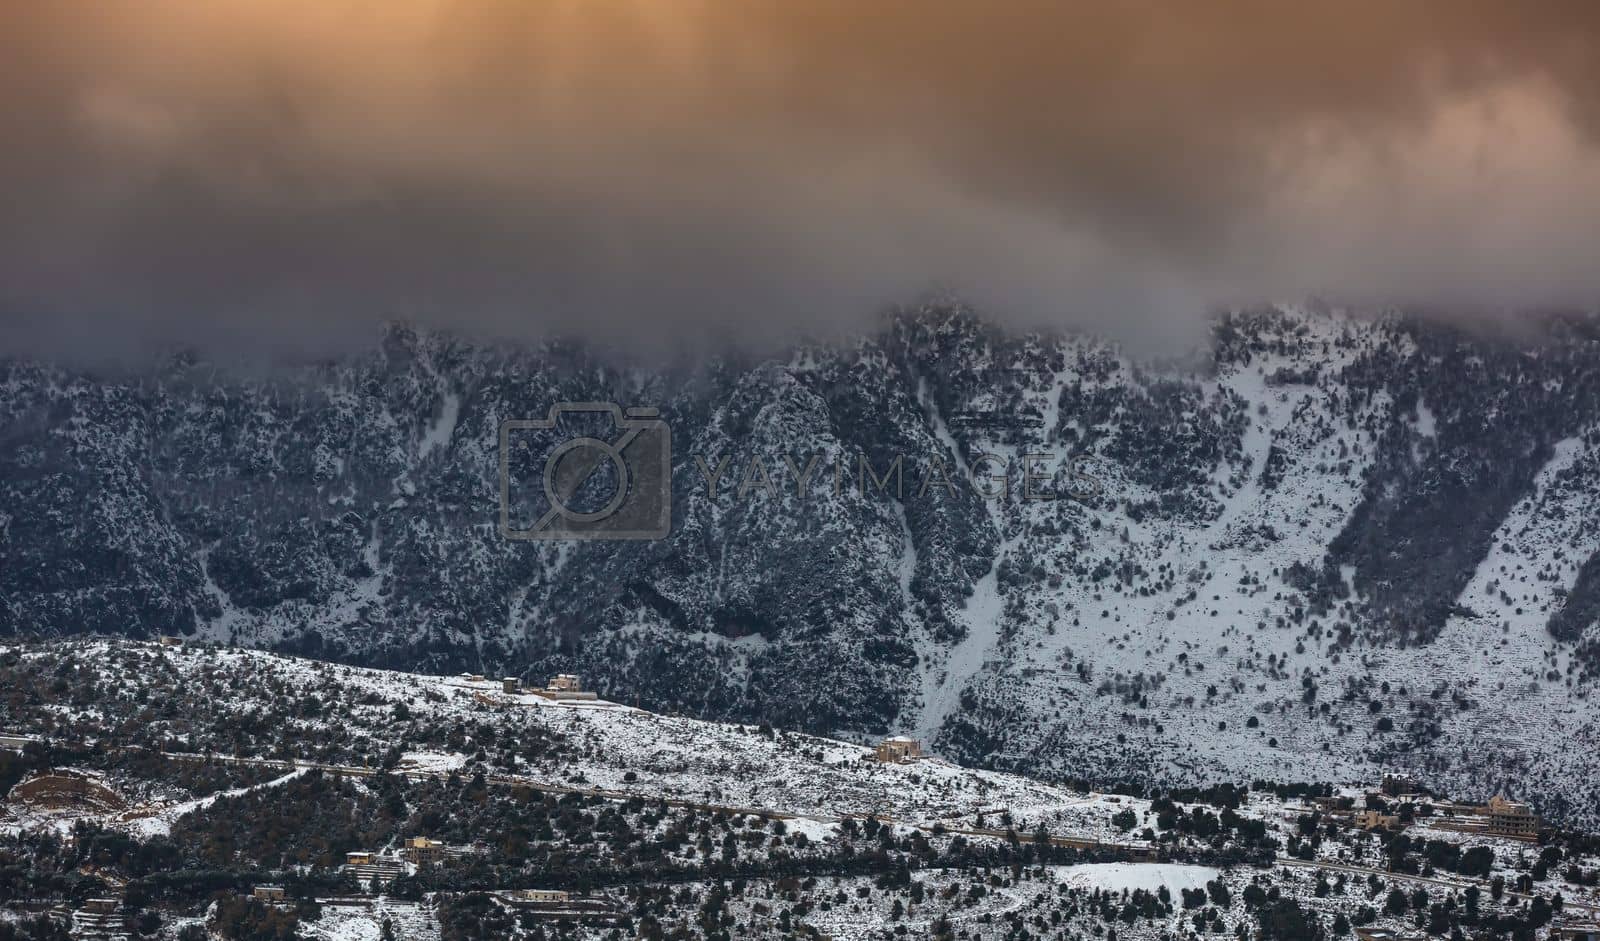 Royalty free image of Peaceful Winter Mountains of Lebanon by Anna_Omelchenko